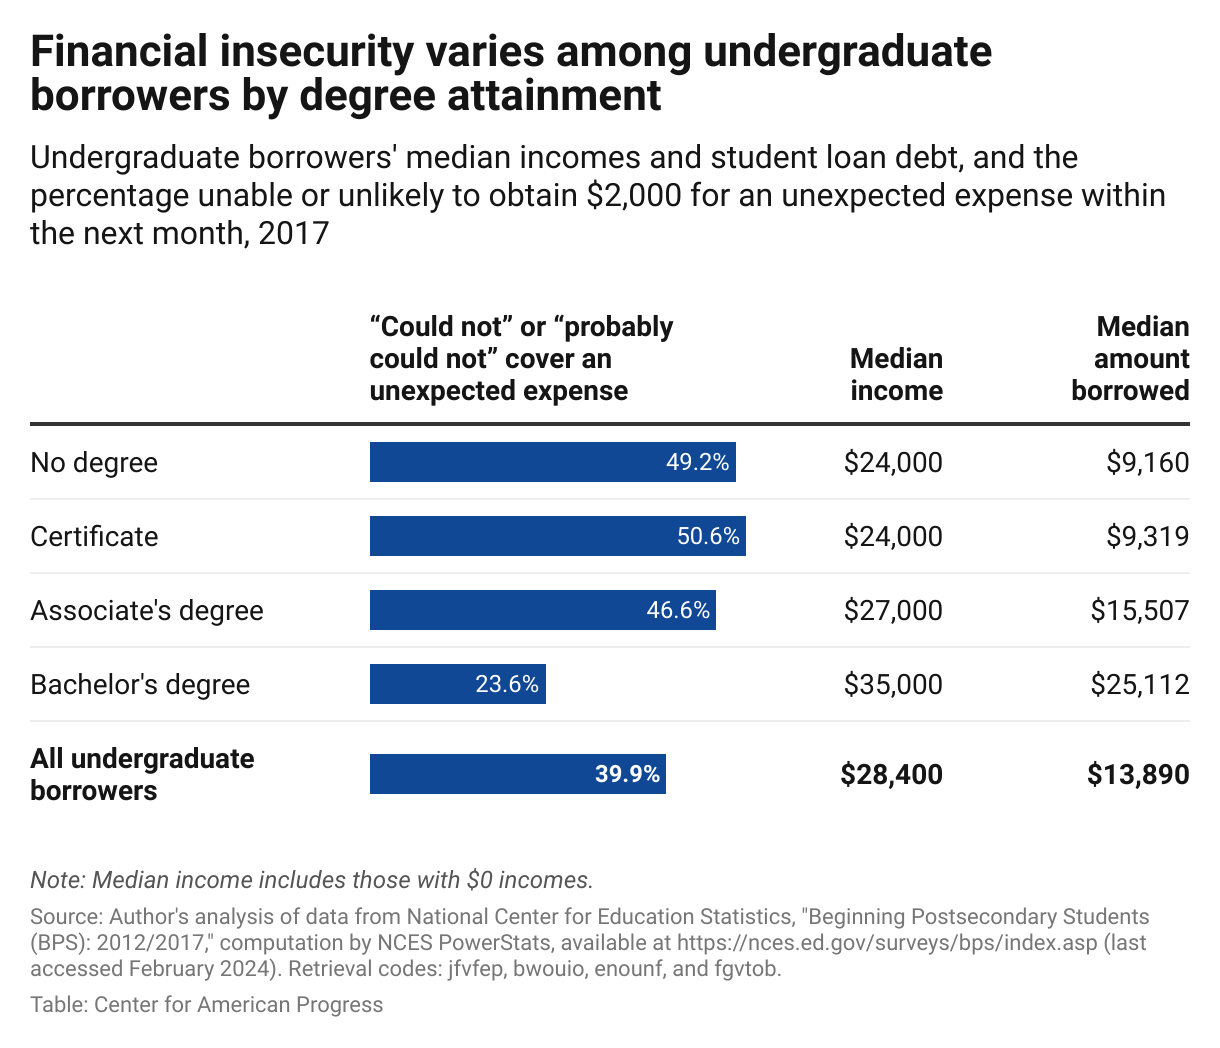 The proportion of student borrowers without a degree, certificate earners, and associate degree holders who "could not" or "probably could not" come up with $2,000 for an unexpected expense within the next month was about twice as high (46 percent to 50 percent) as for the proportion of student borrowers with a bachelor's degree (24 percent). 